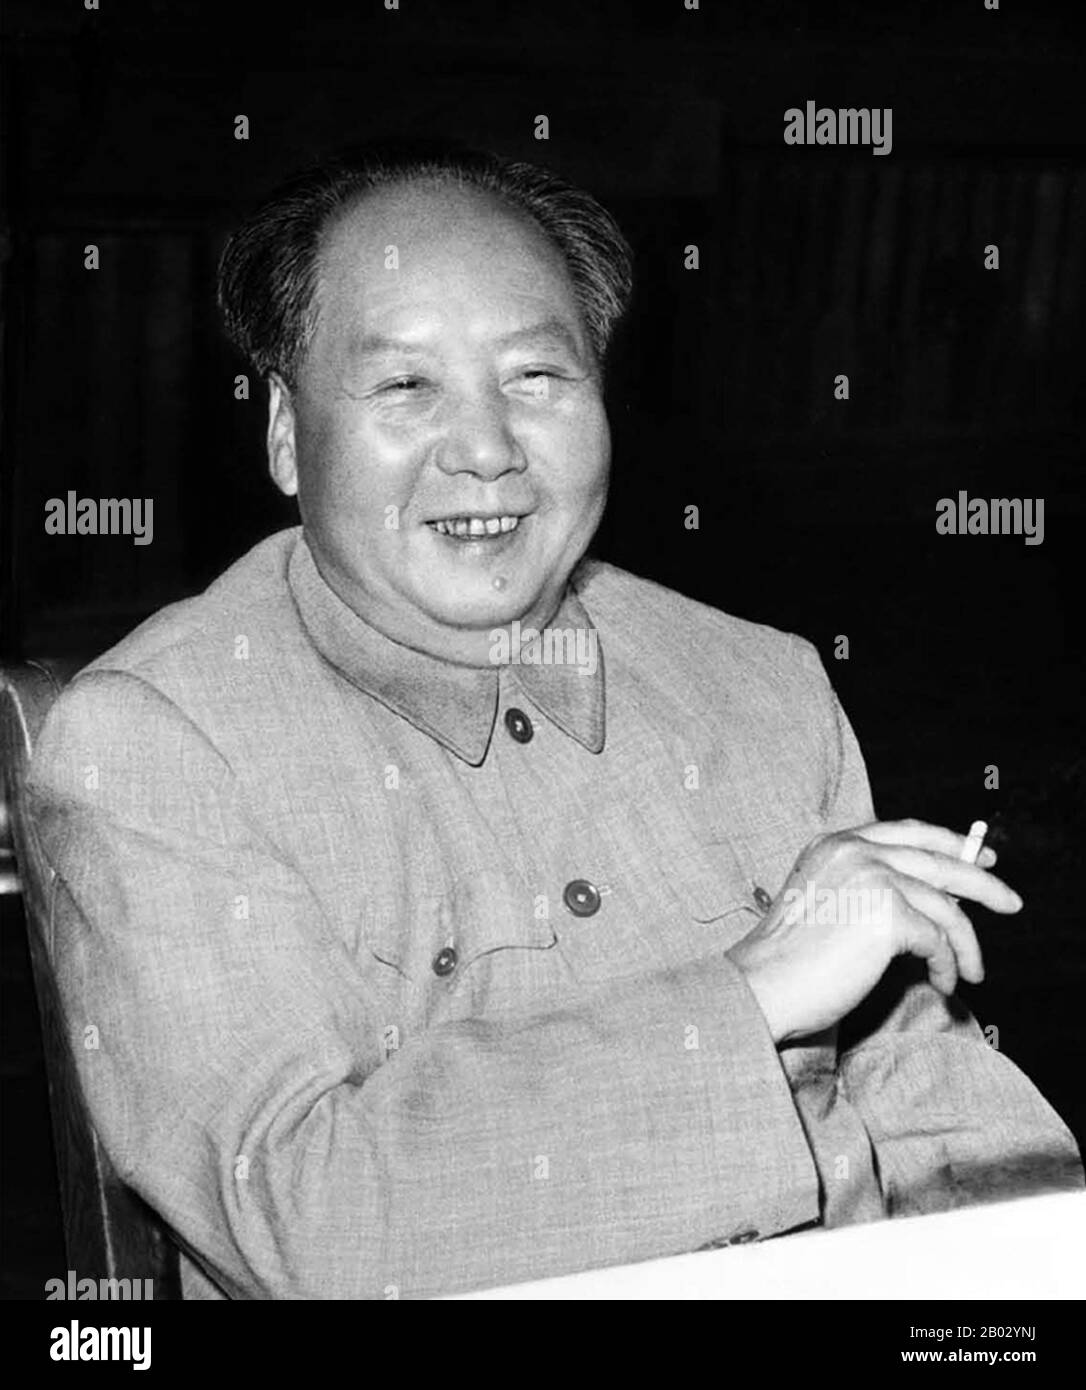 Mao Zedong, also transliterated as Mao Tse-tung (26 December 1893 – 9 September 1976), was a Chinese communist revolutionary, guerrilla warfare strategist, author, political theorist, and leader of the Chinese Revolution. Commonly referred to as Chairman Mao, he was the architect of the People's Republic of China (PRC) from its establishment in 1949, and held authoritarian control over the nation until his death in 1976.  His theoretical contribution to Marxism-Leninism, along with his military strategies and brand of political policies, are now collectively known as Maoism. Stock Photo